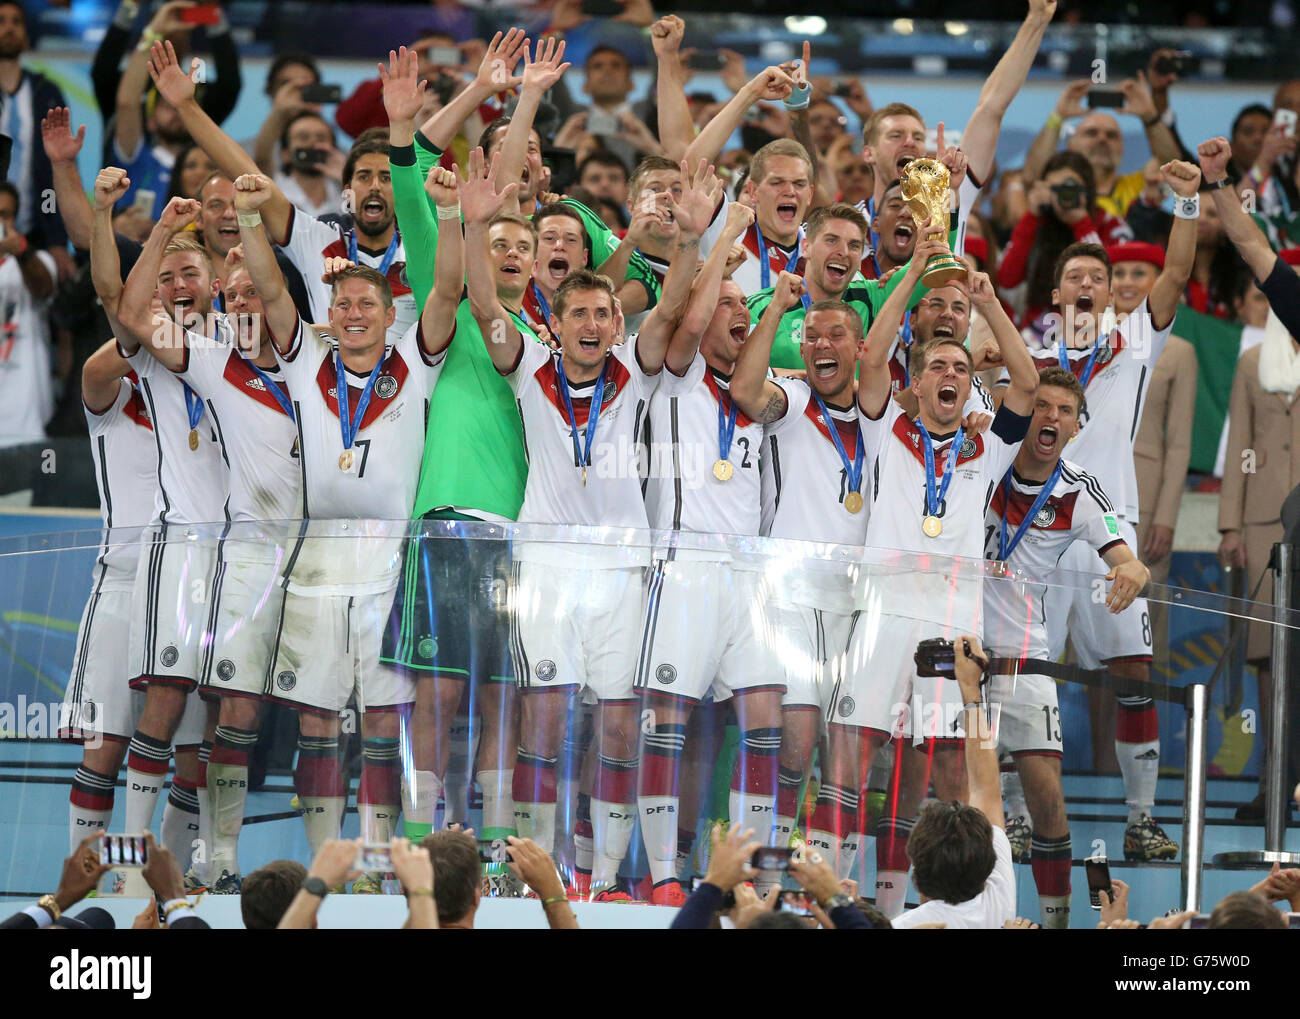 Germany's Philipp Lahm lifts the World Cup and celebrates victory with team-mates after during the FIFA World Cup Final at the Estadio do Maracana, Rio de Janerio, Brazil. Stock Photo